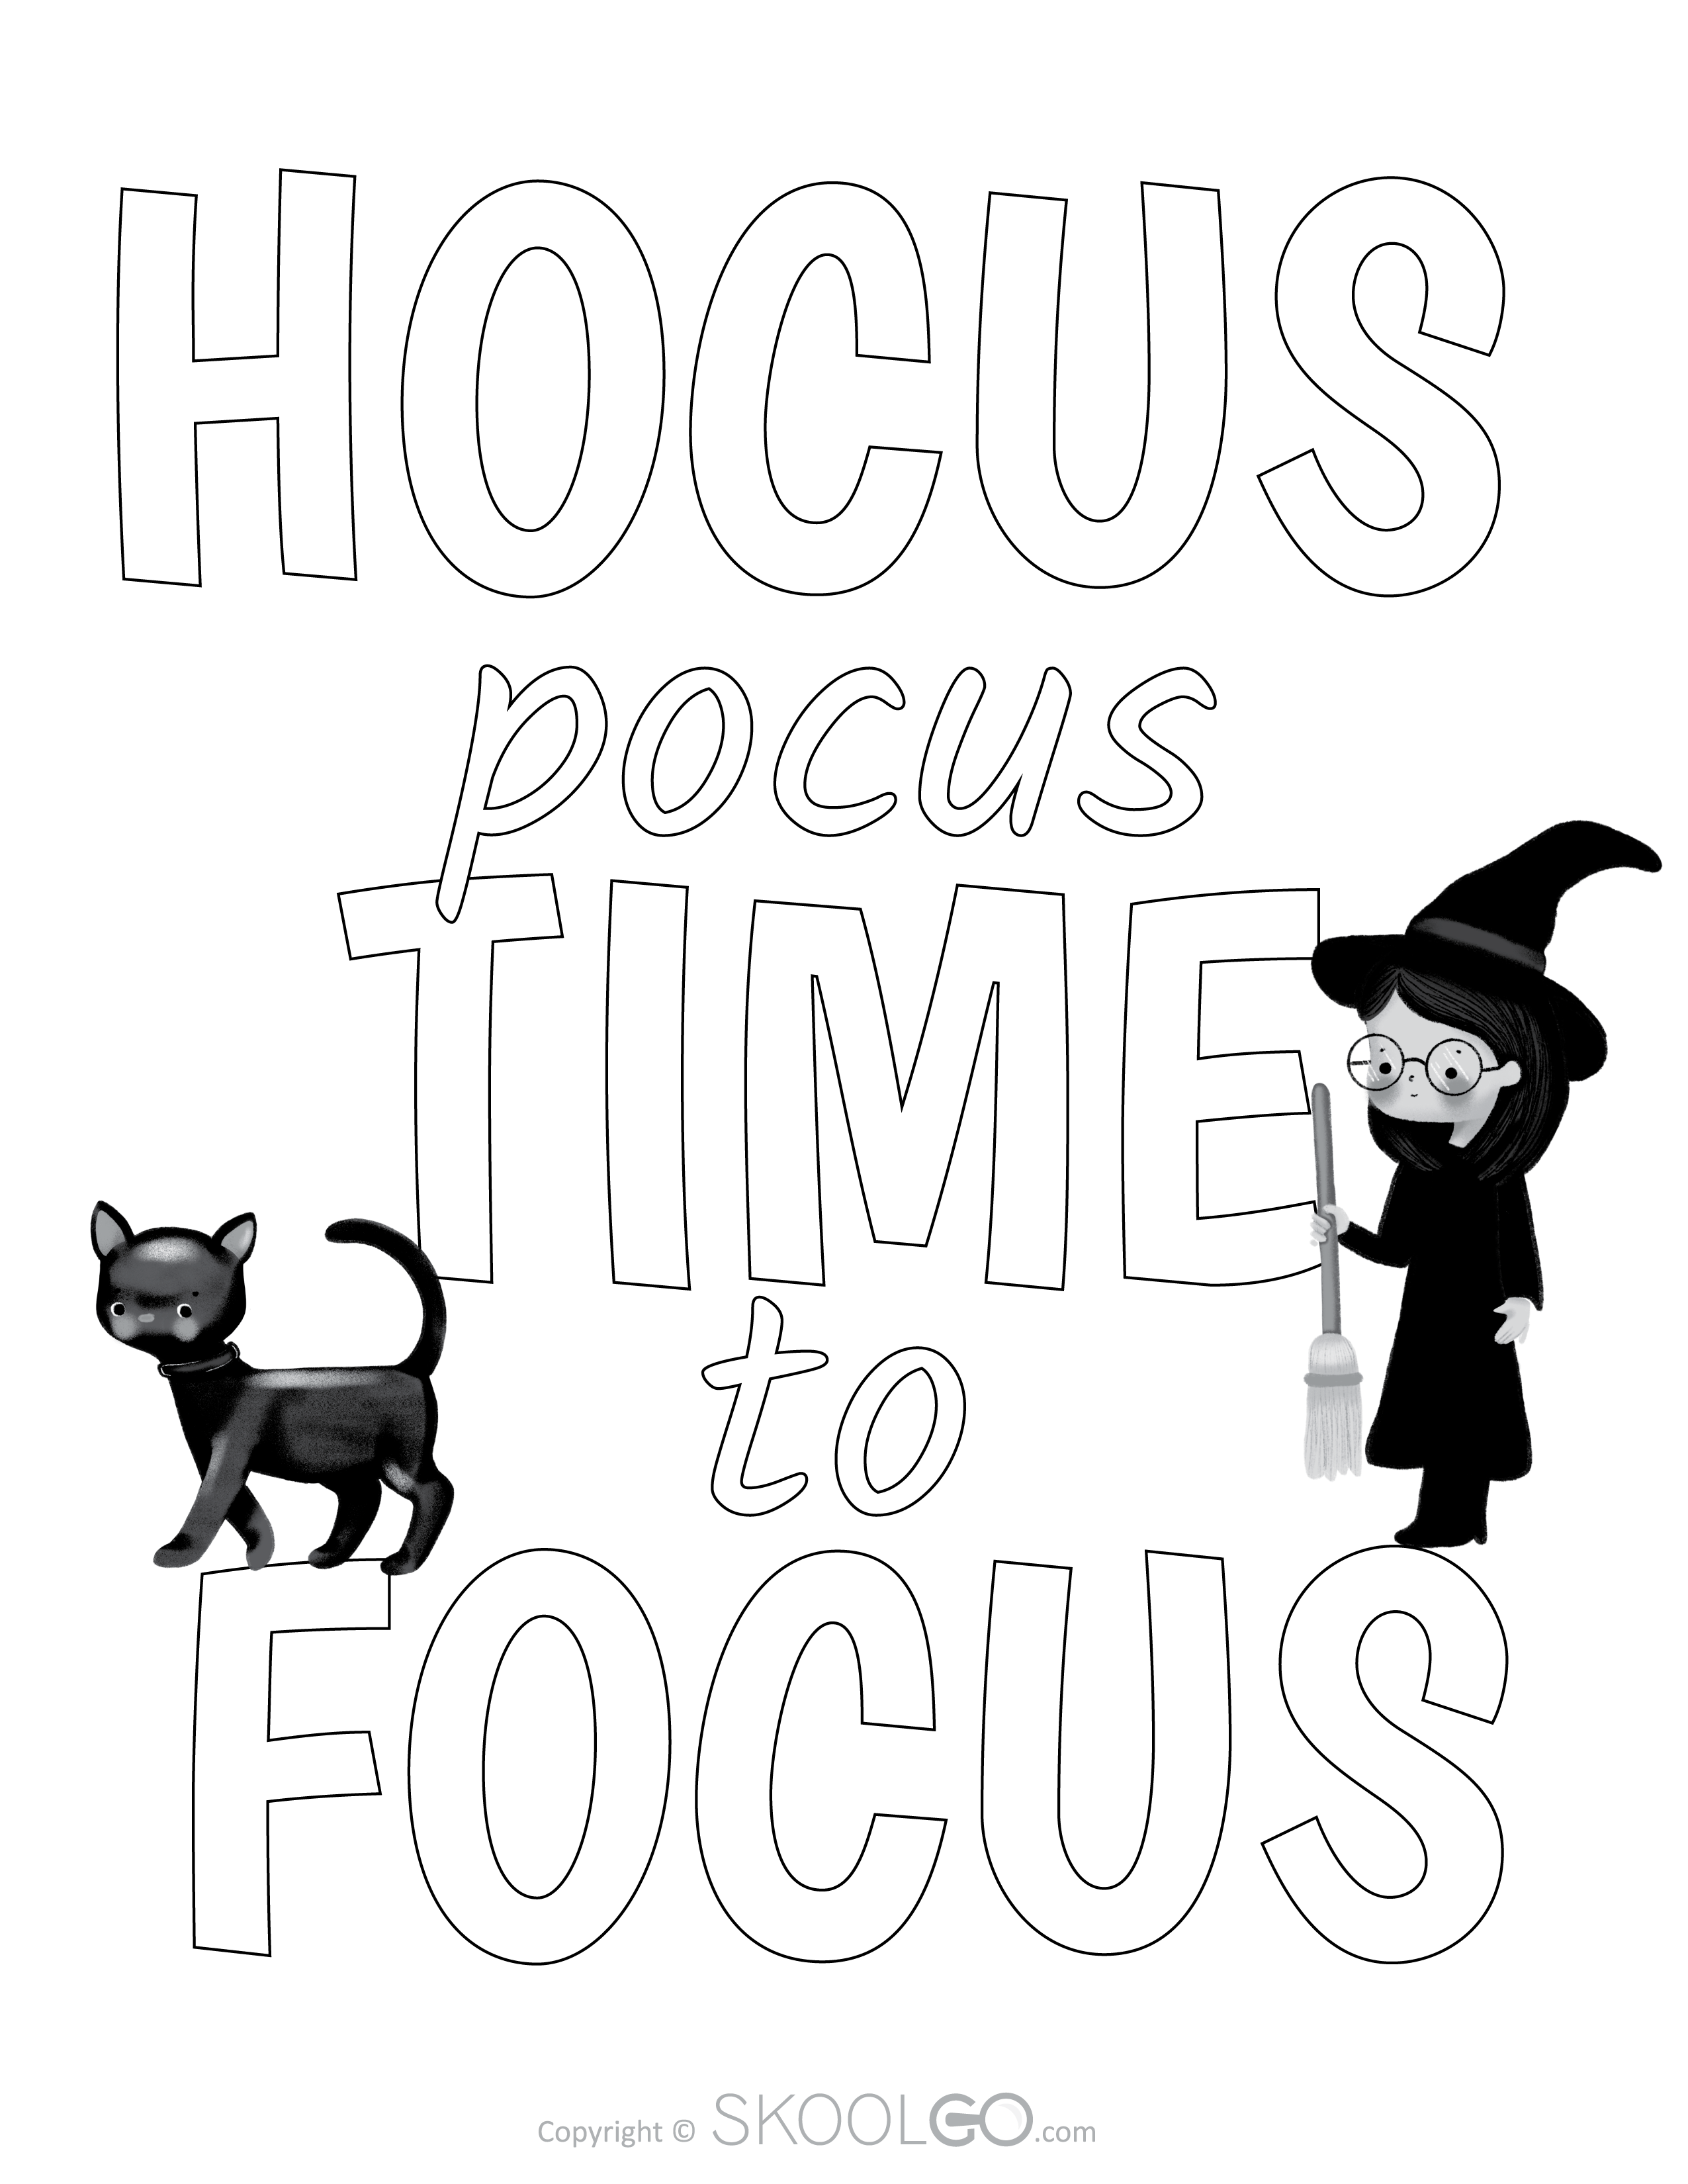 Hocus Pocus Time To Focus - Free Classroom Poster Coloring Version